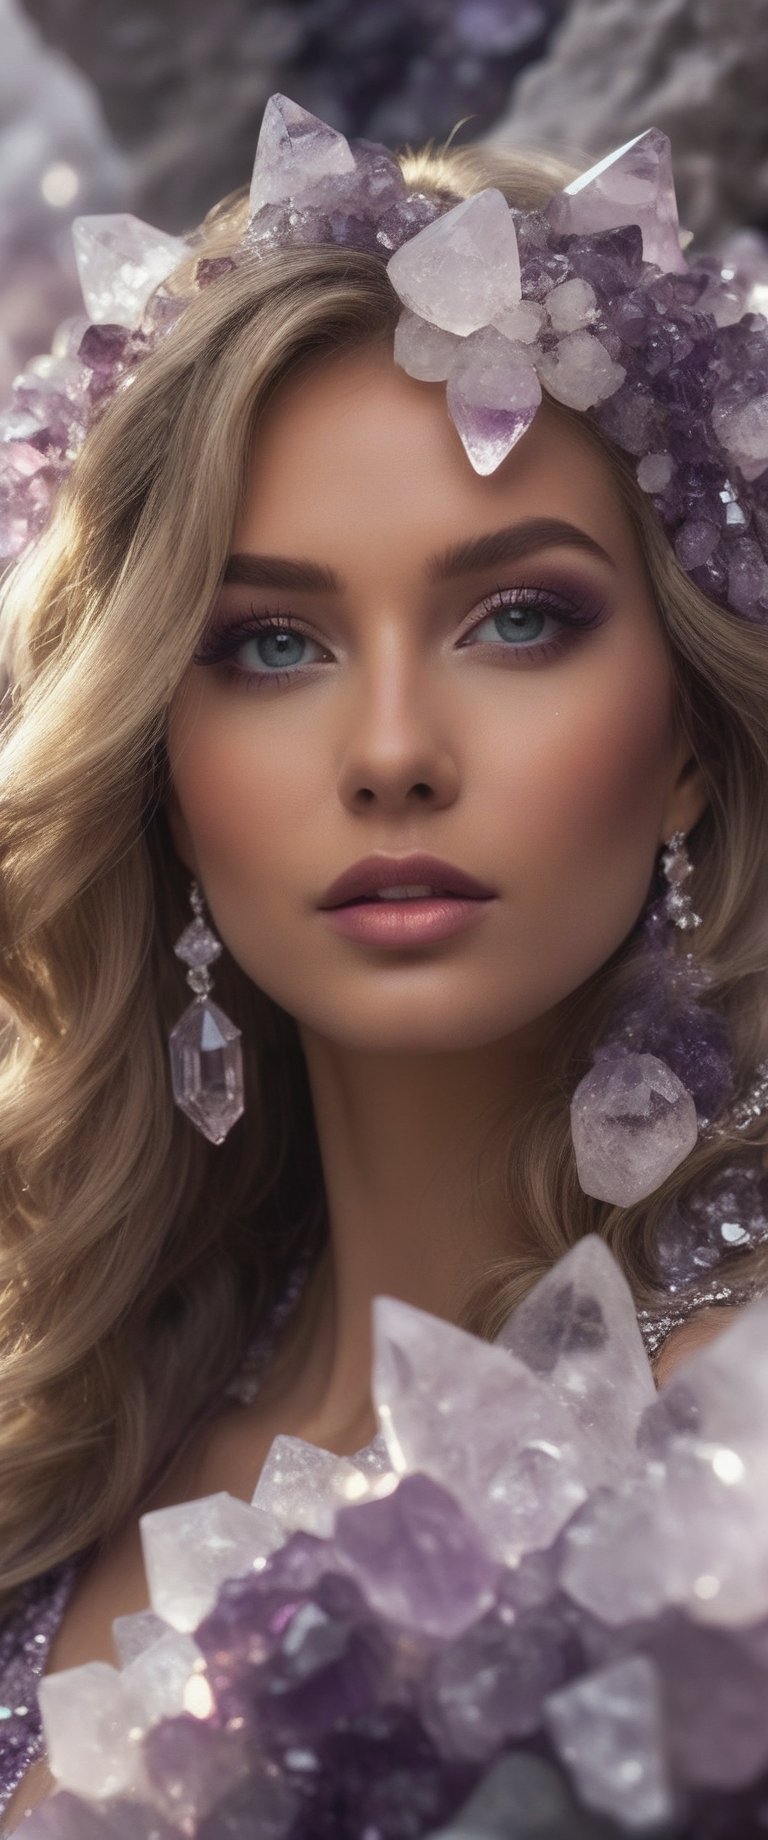 A closeup of an enchanting scene featuring a crystalized woman adorned in delicate amethyst and quartz crystals, radiating beauty amidst the shimmering gemstones, with a focus on her face,Amethyst 